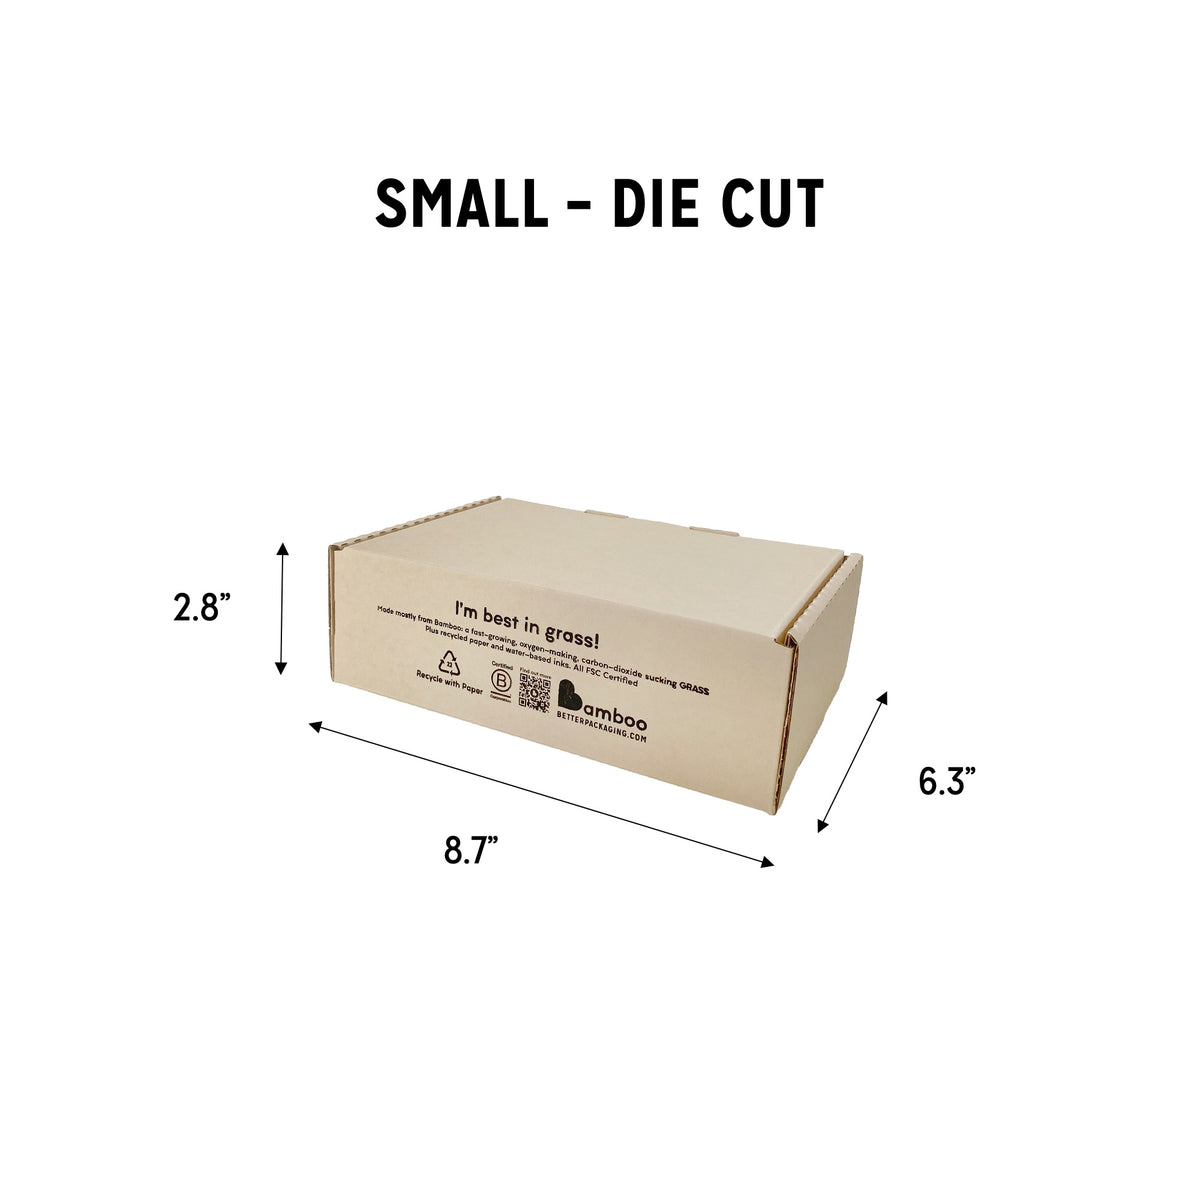 Small sized die cut Better Packaging bamboo box. 2.8&quot; high, 8.7&quot; wide, 6.3&quot; deep